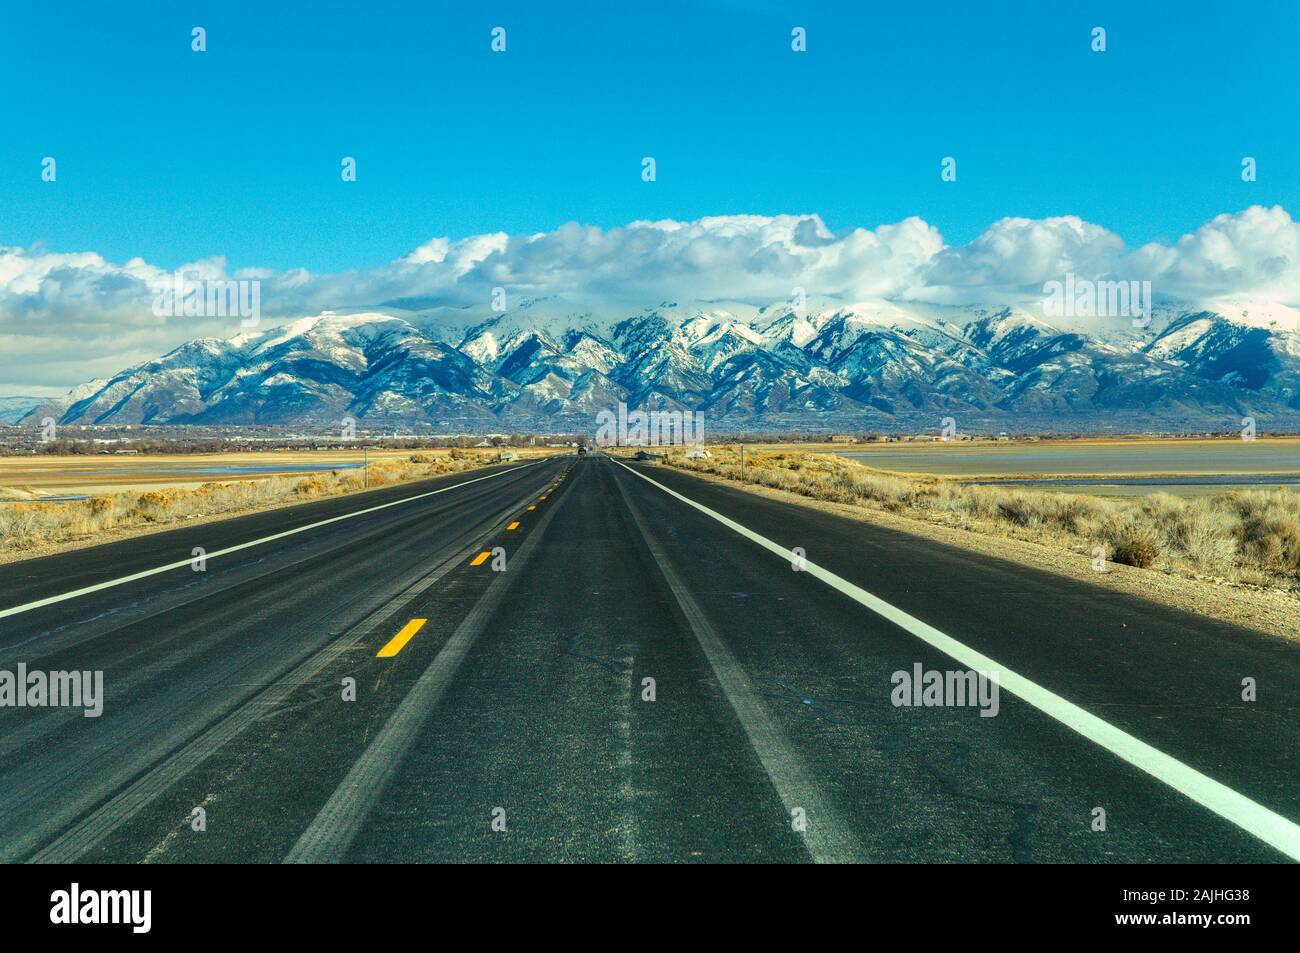 View of a typical American road on the way to Yosemite National Park, Wyoming, USA. Stock Photo